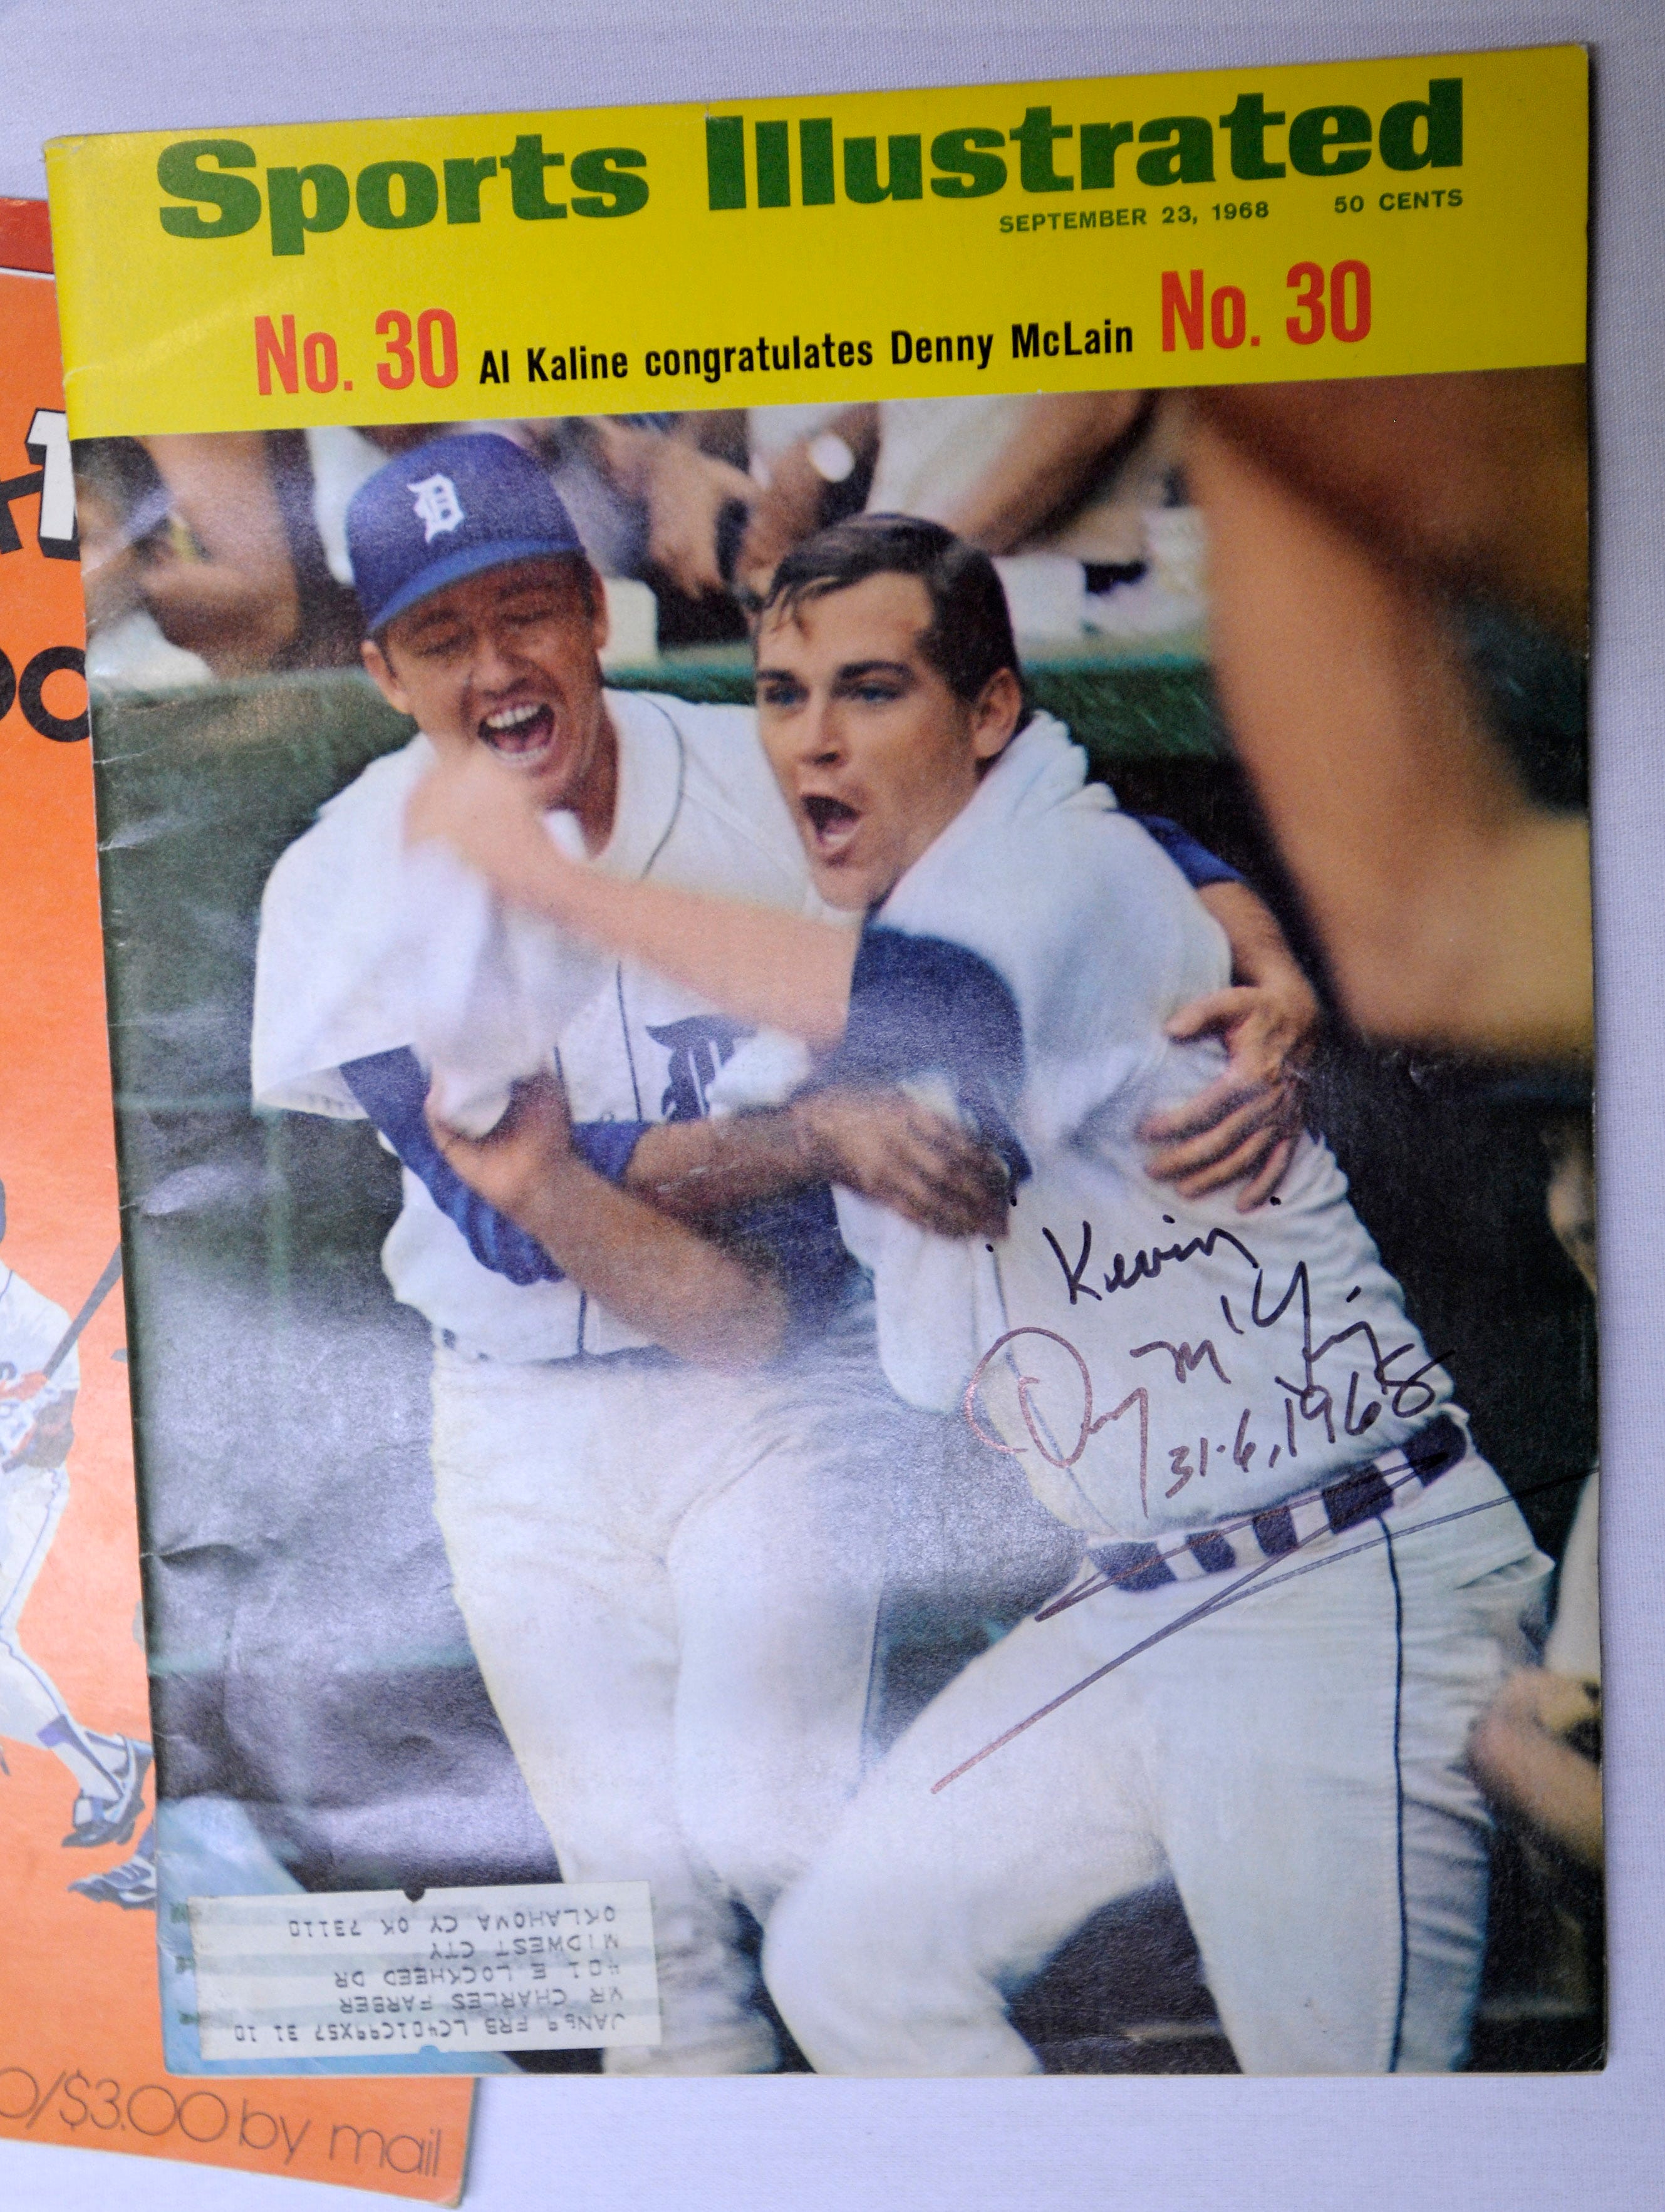 This is a copy of Sports Illustrated, September 23, 1968, as Al Kaline congratulates Denny McLain after McLain's 30th win of the season.